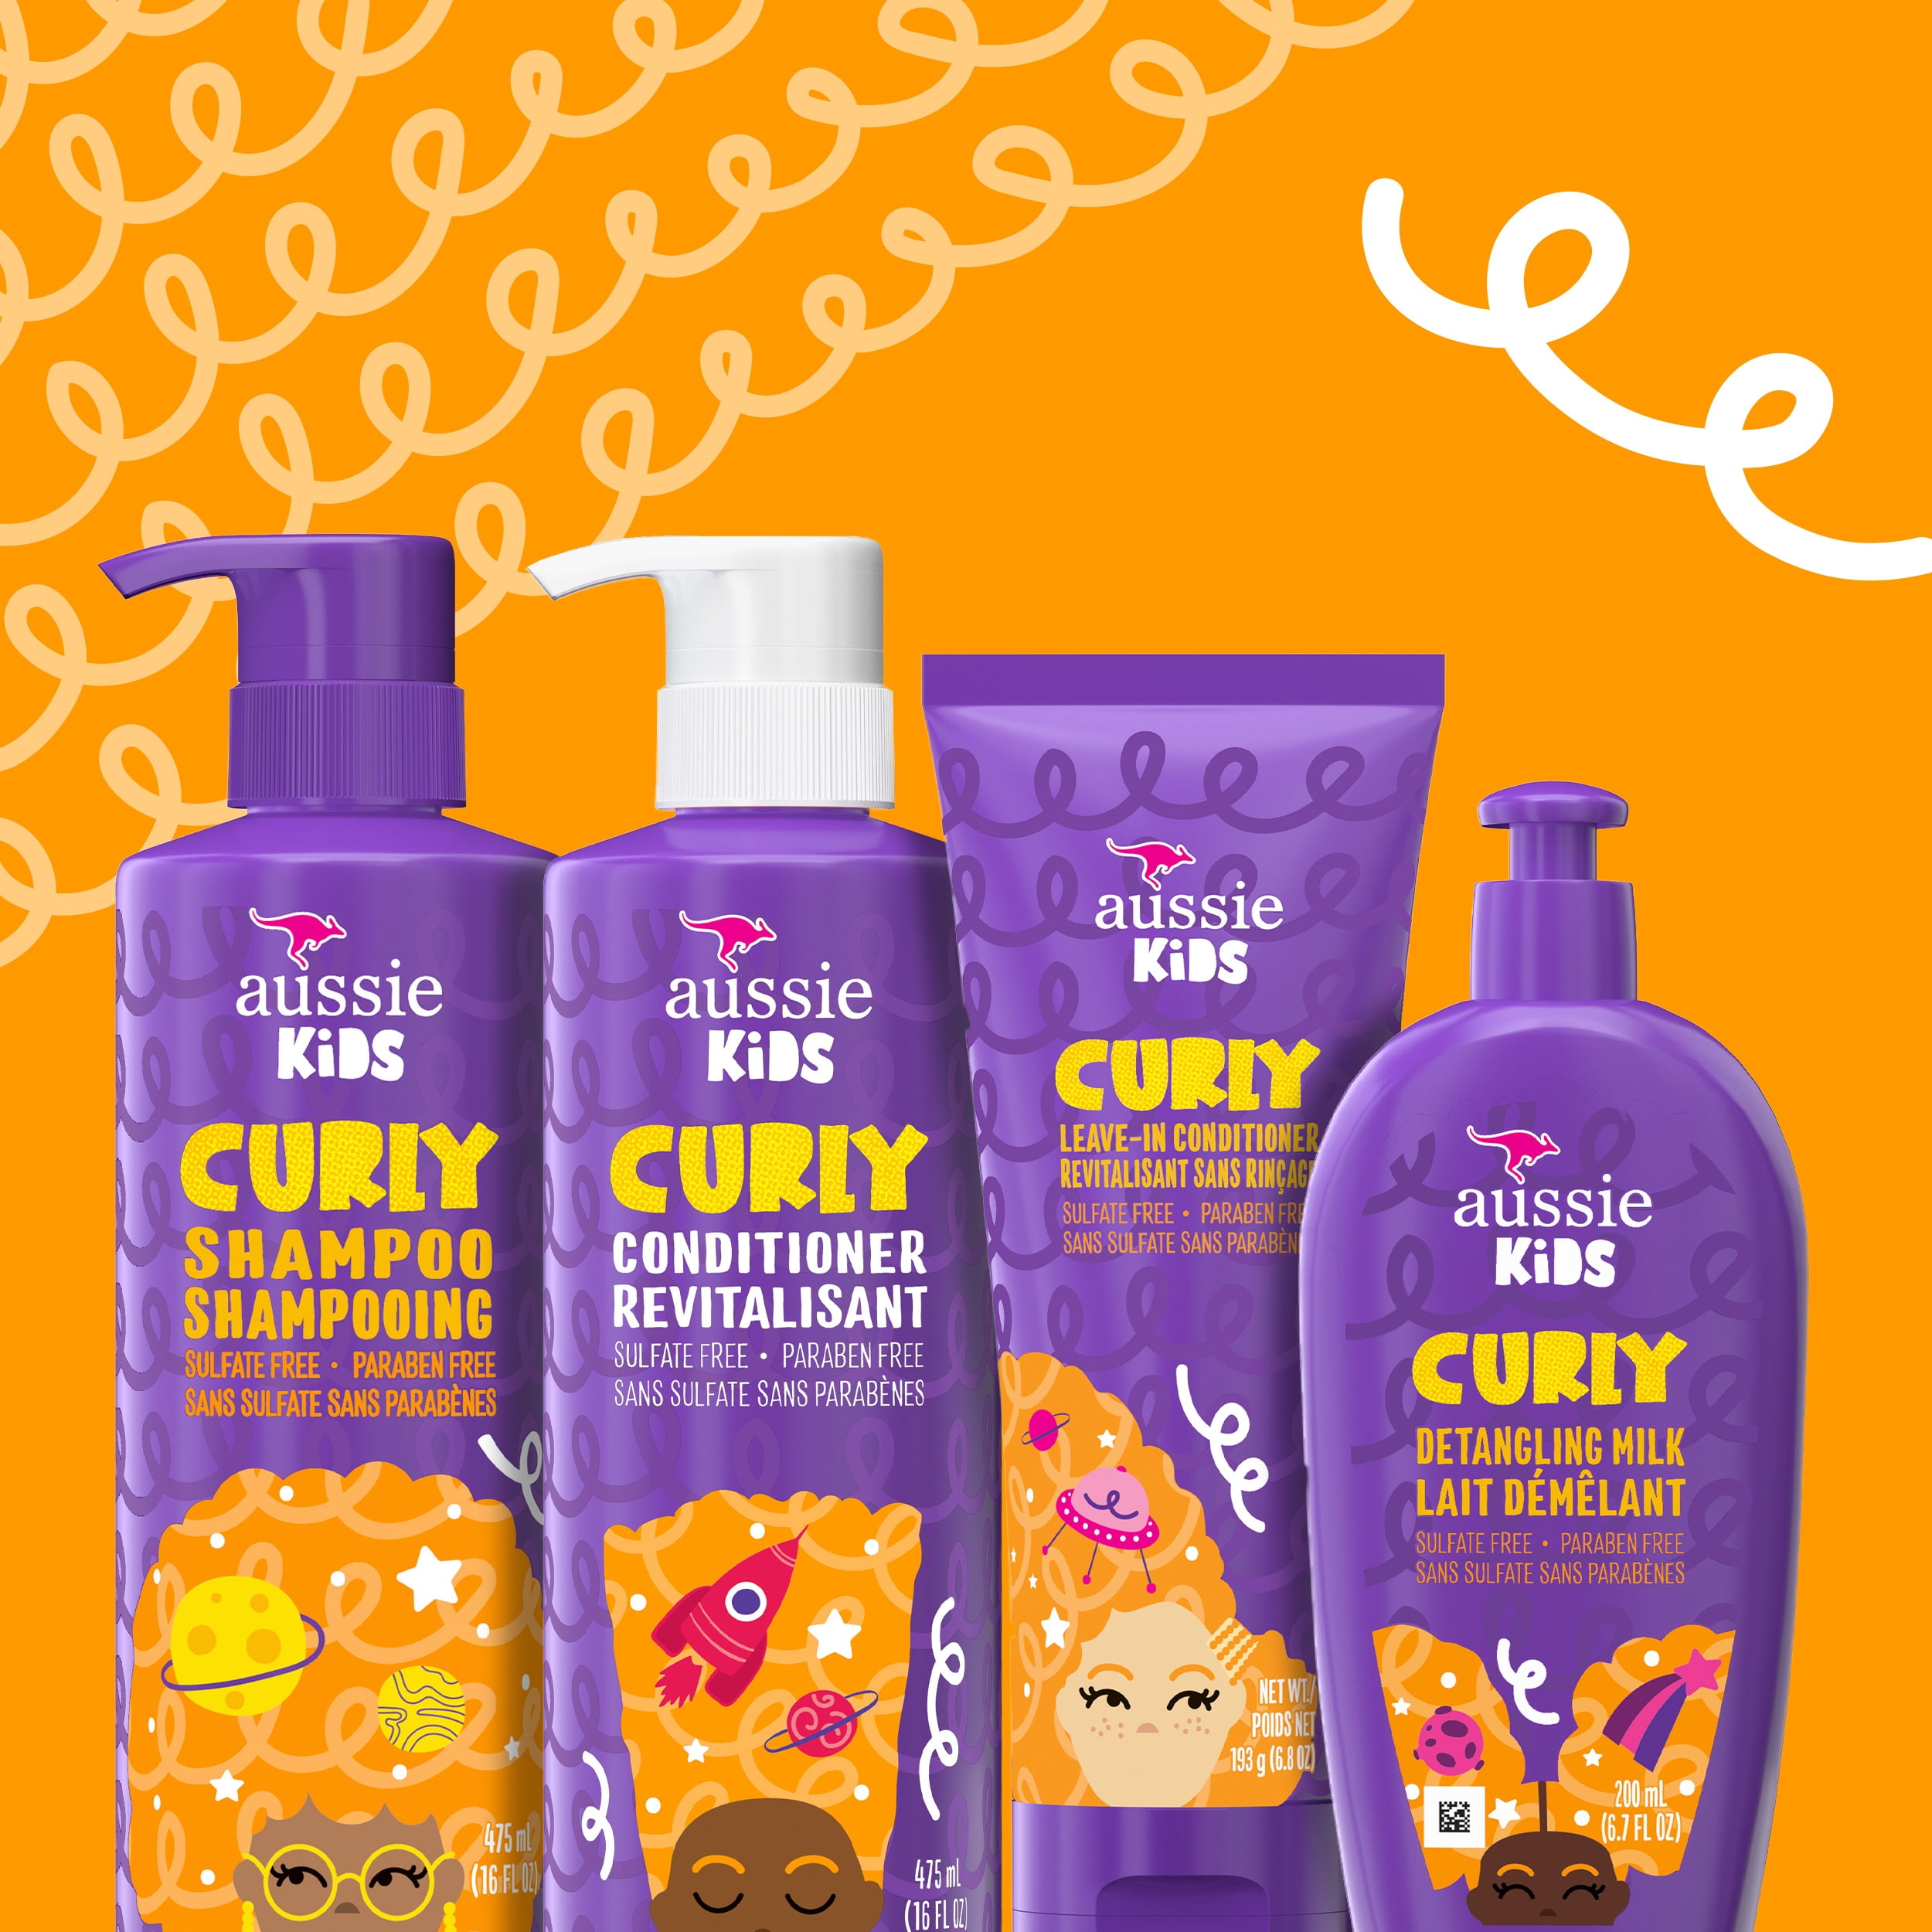 nederdel bunke At bygge Aussie Kids Shampoo for Curly Hair, Sulfate Free, 16 oz - Walmart.com